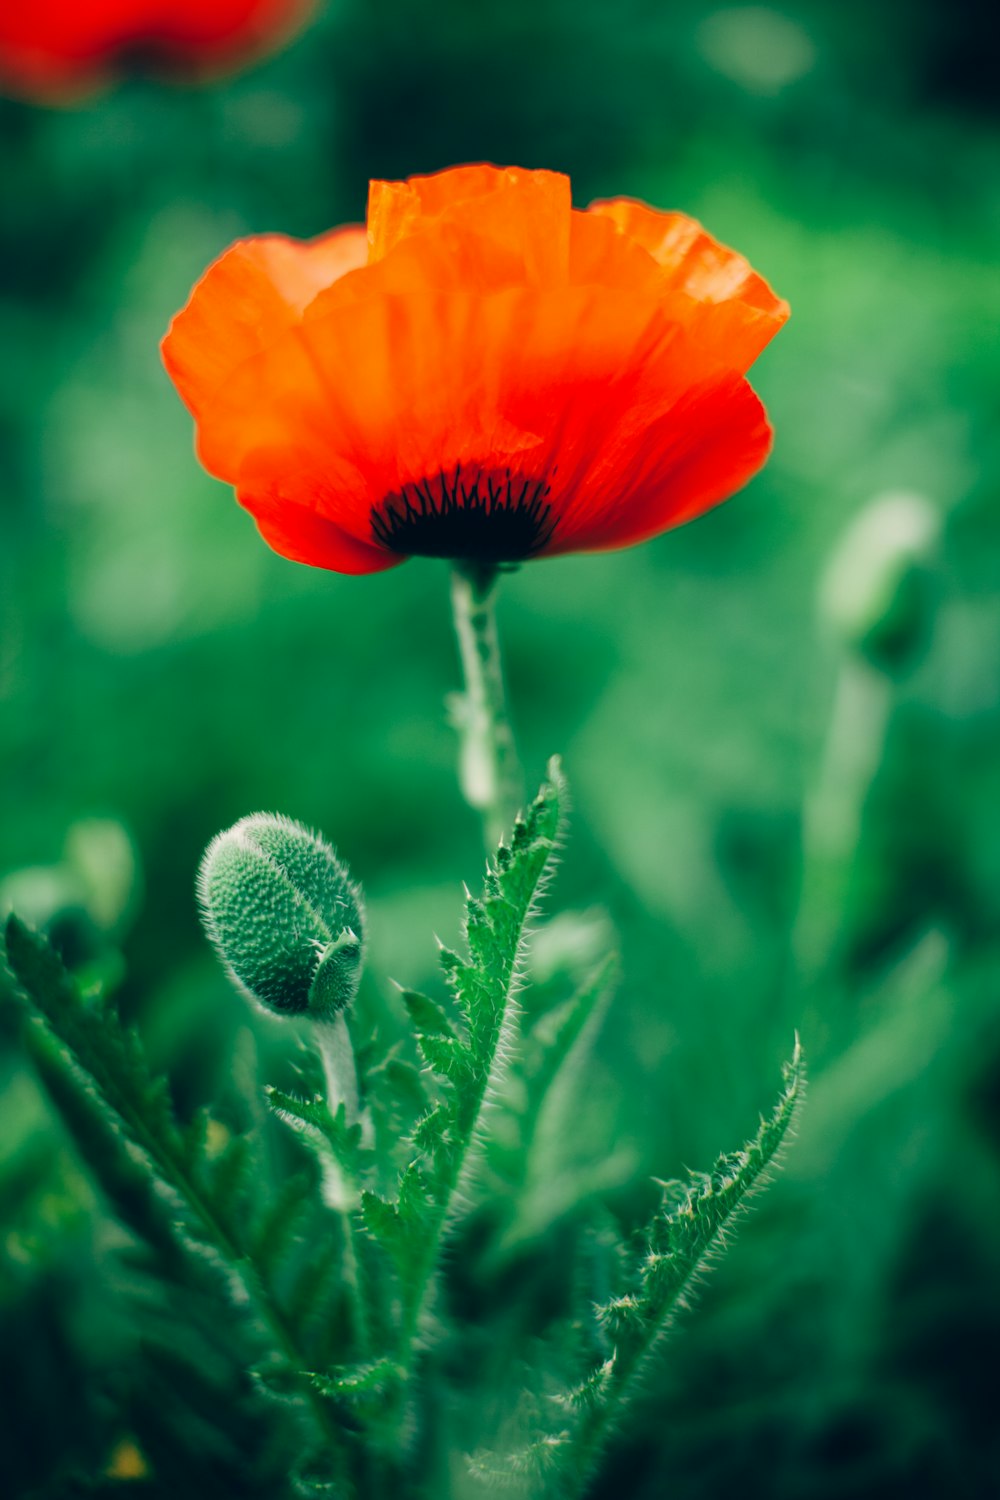 red common poppy flower selective focus phography